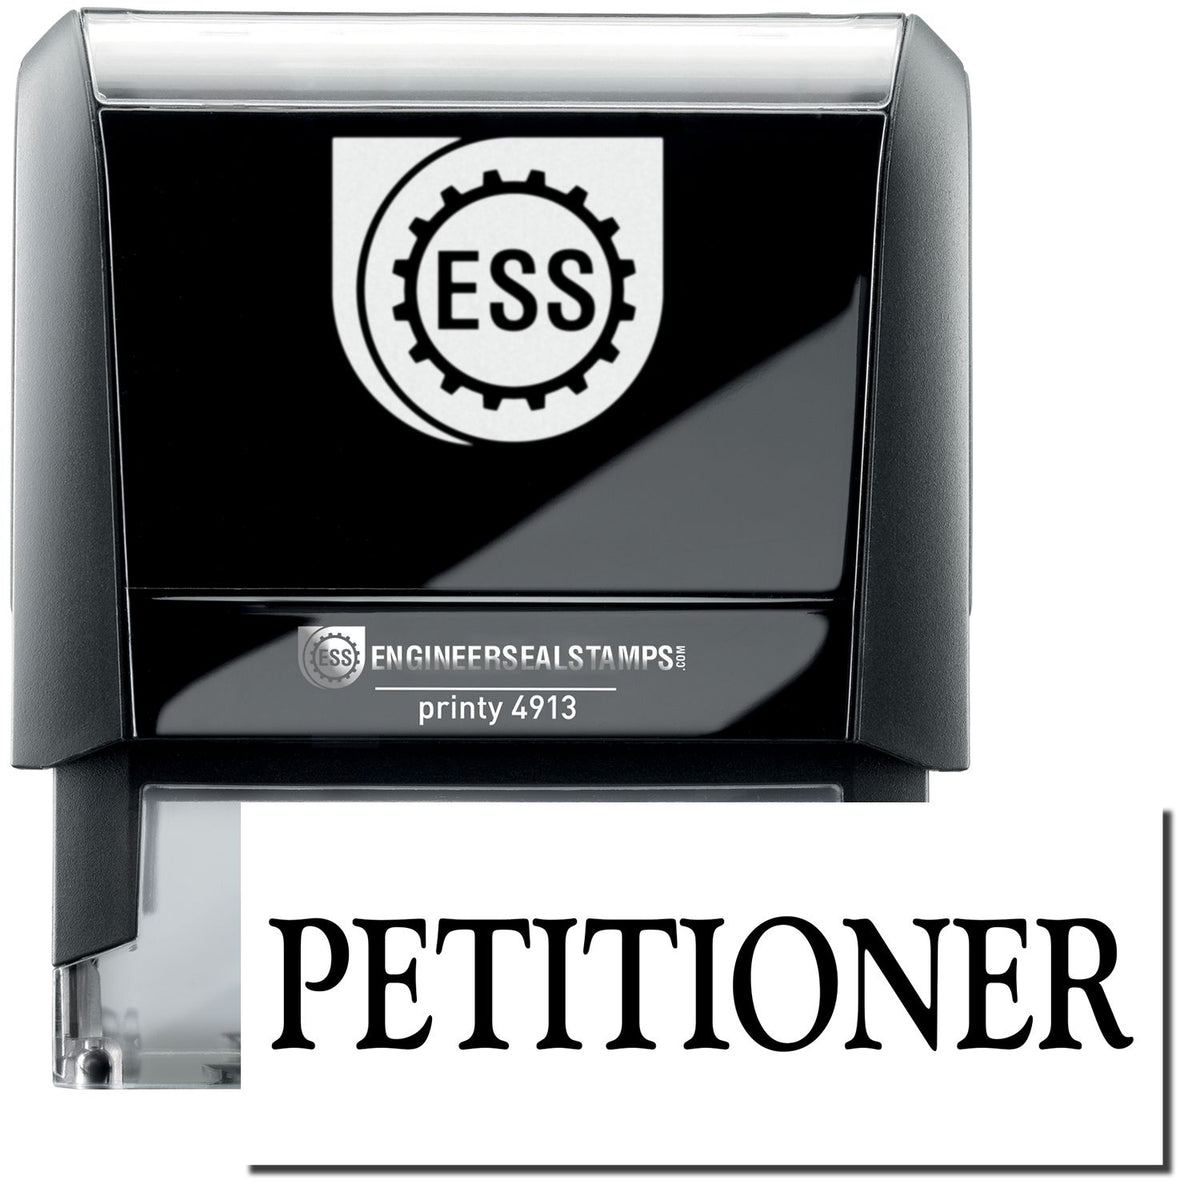 A self-inking stamp with a stamped image showing how the text &quot;PETITIONER&quot; in a large bold font is displayed by it.